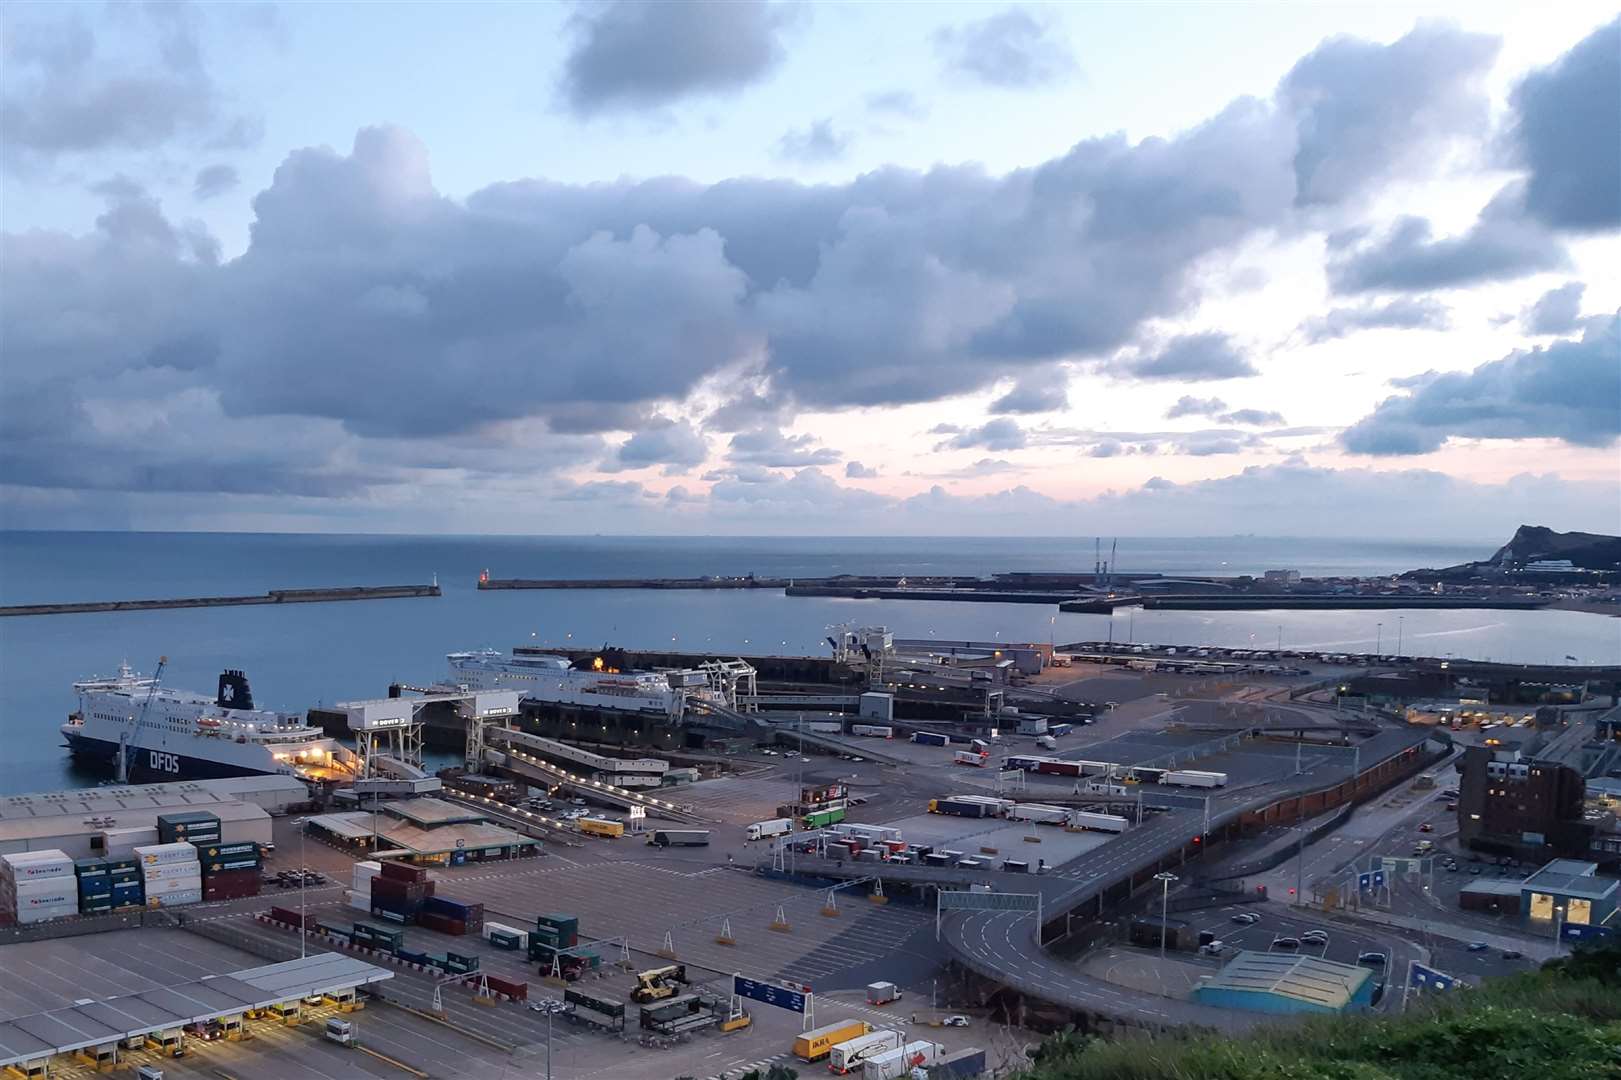 Dover Eastern Docks is owned by the Port of Dover